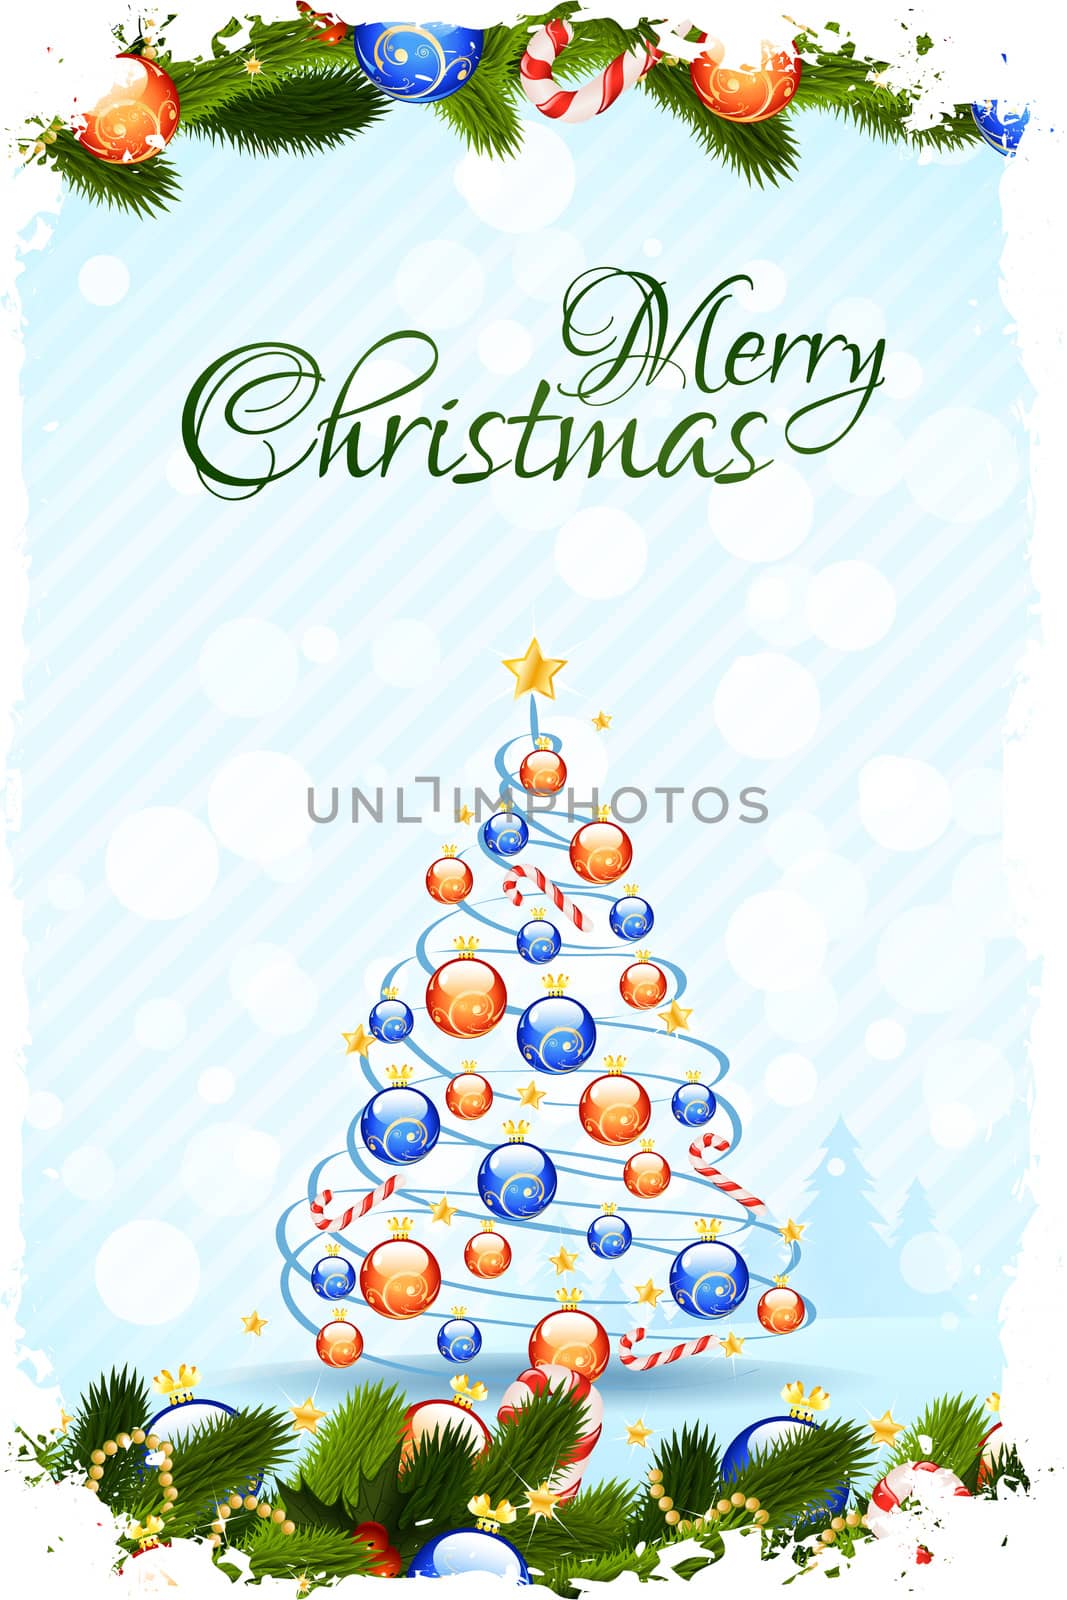 Christmas Greeting Card by WaD